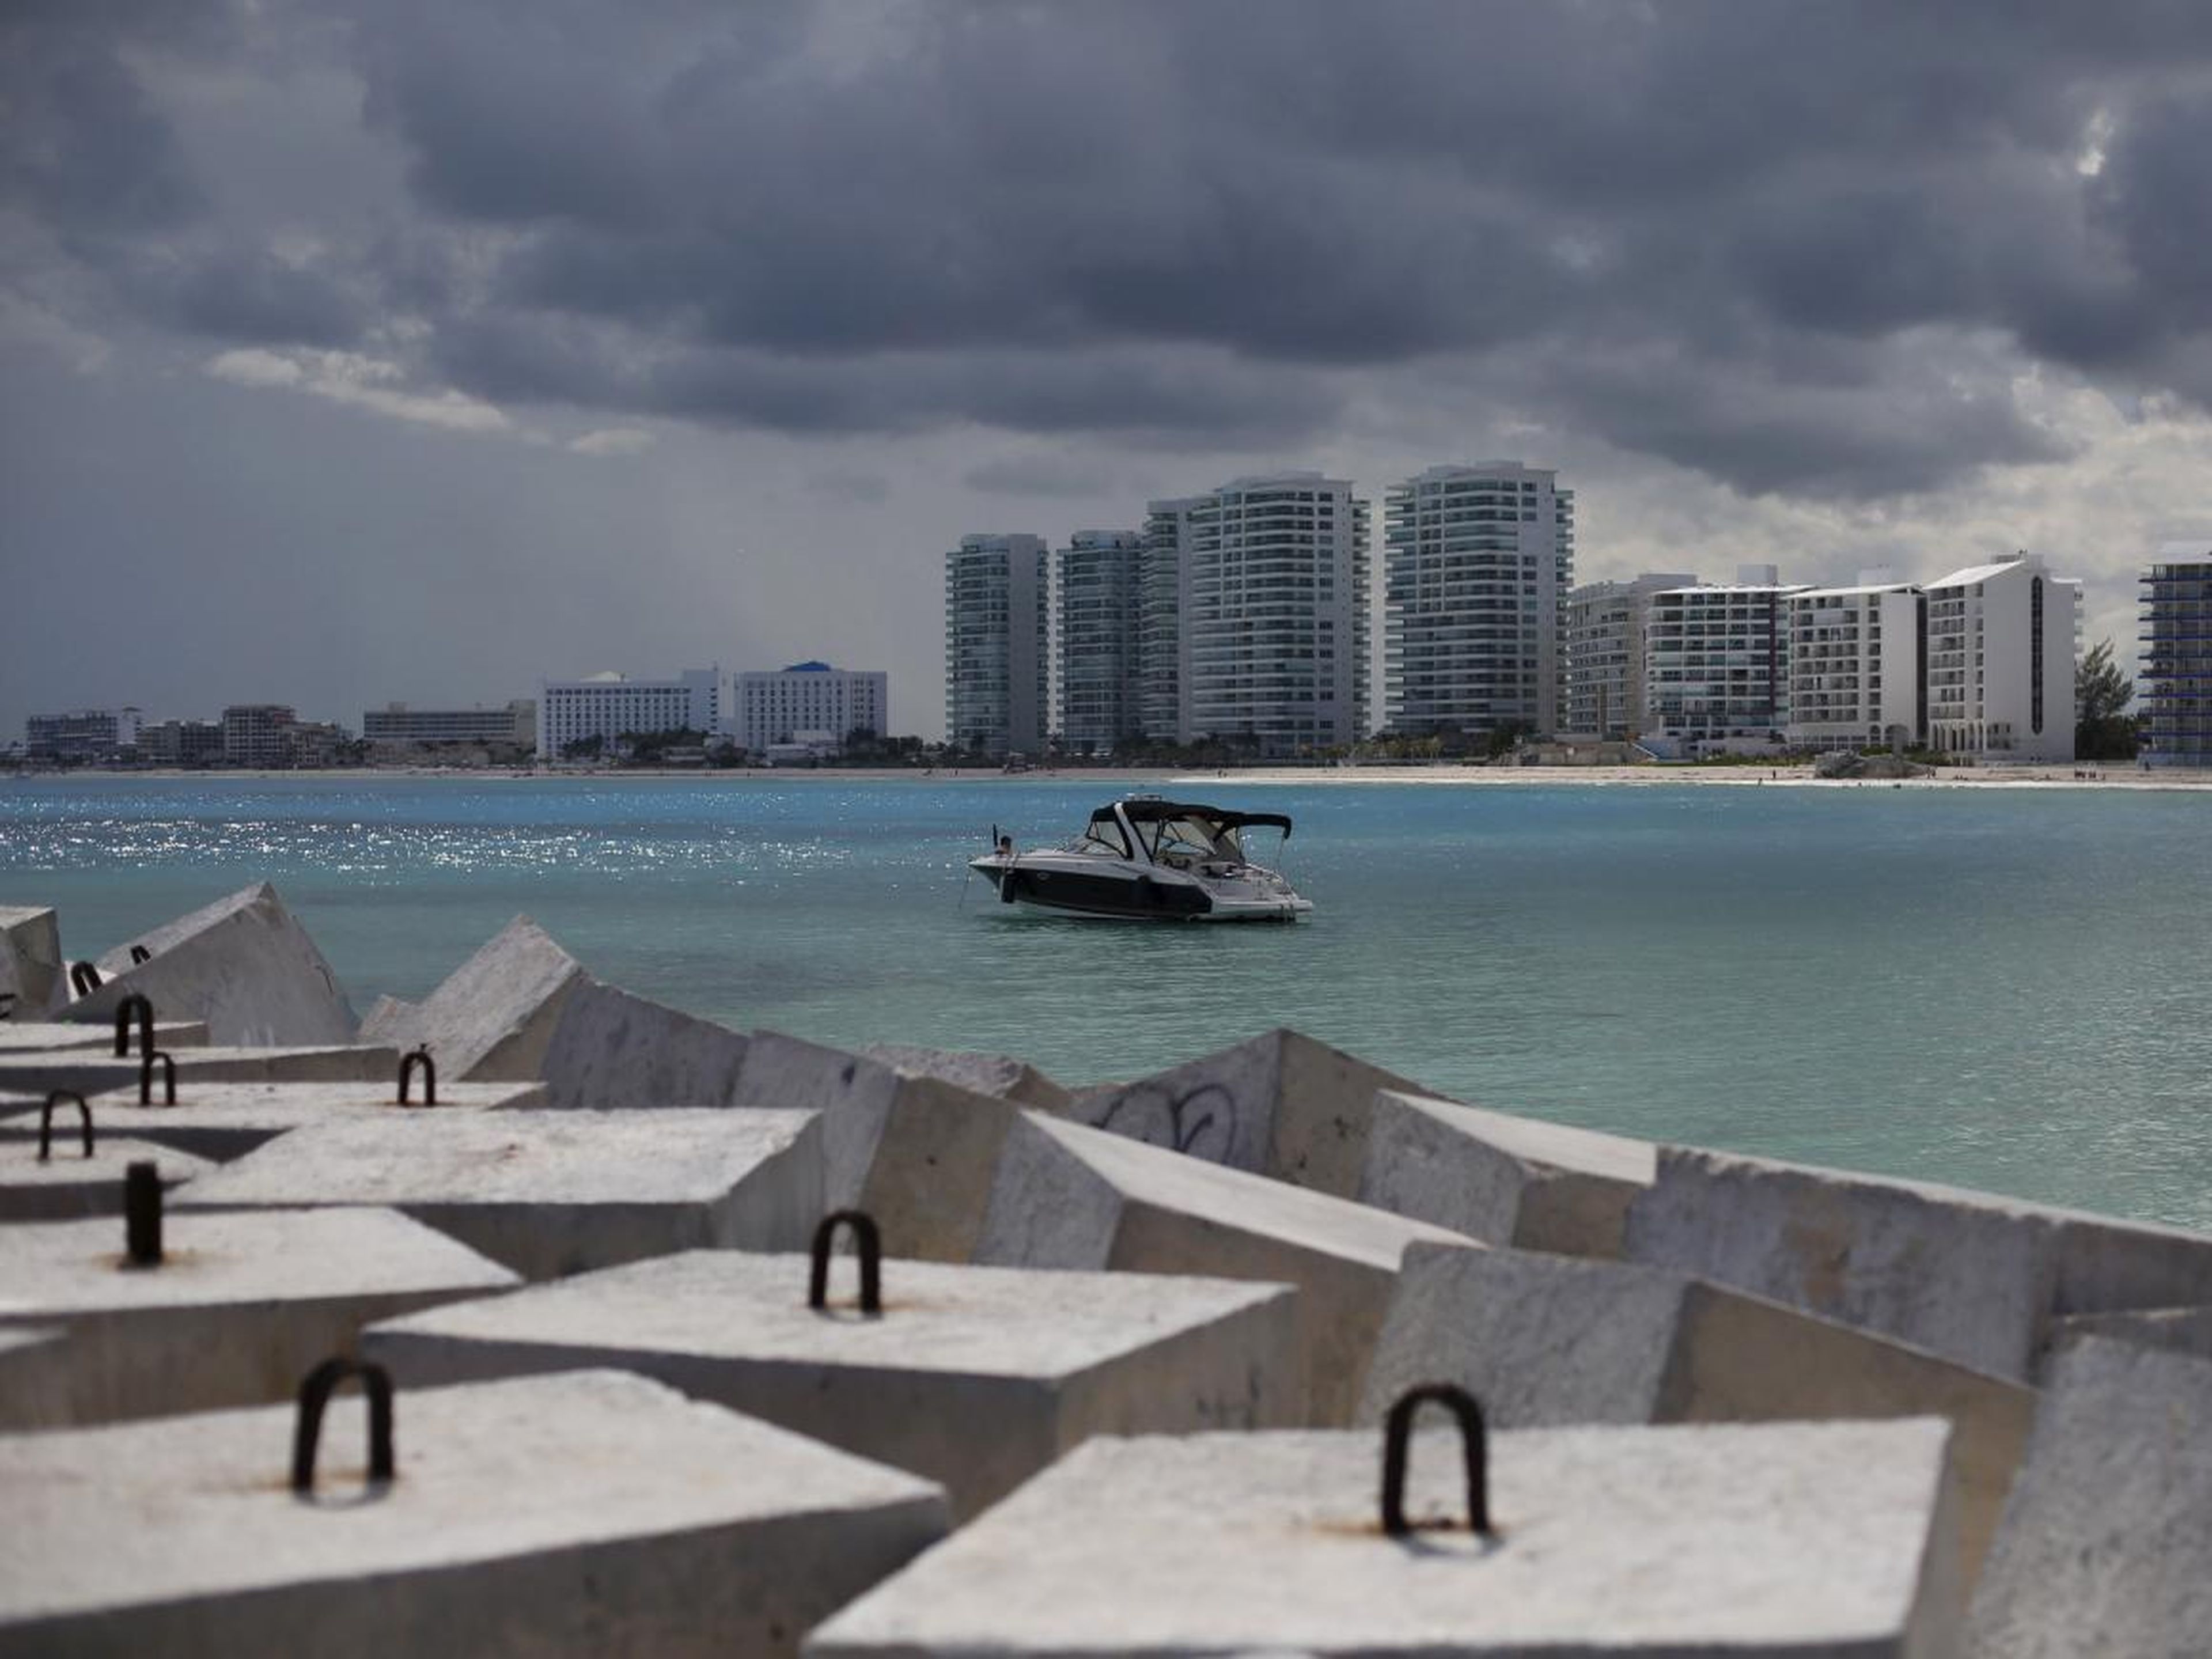 These austere concrete blocks were put on Cancún beaches to serve as protection from hurricanes in 2013.